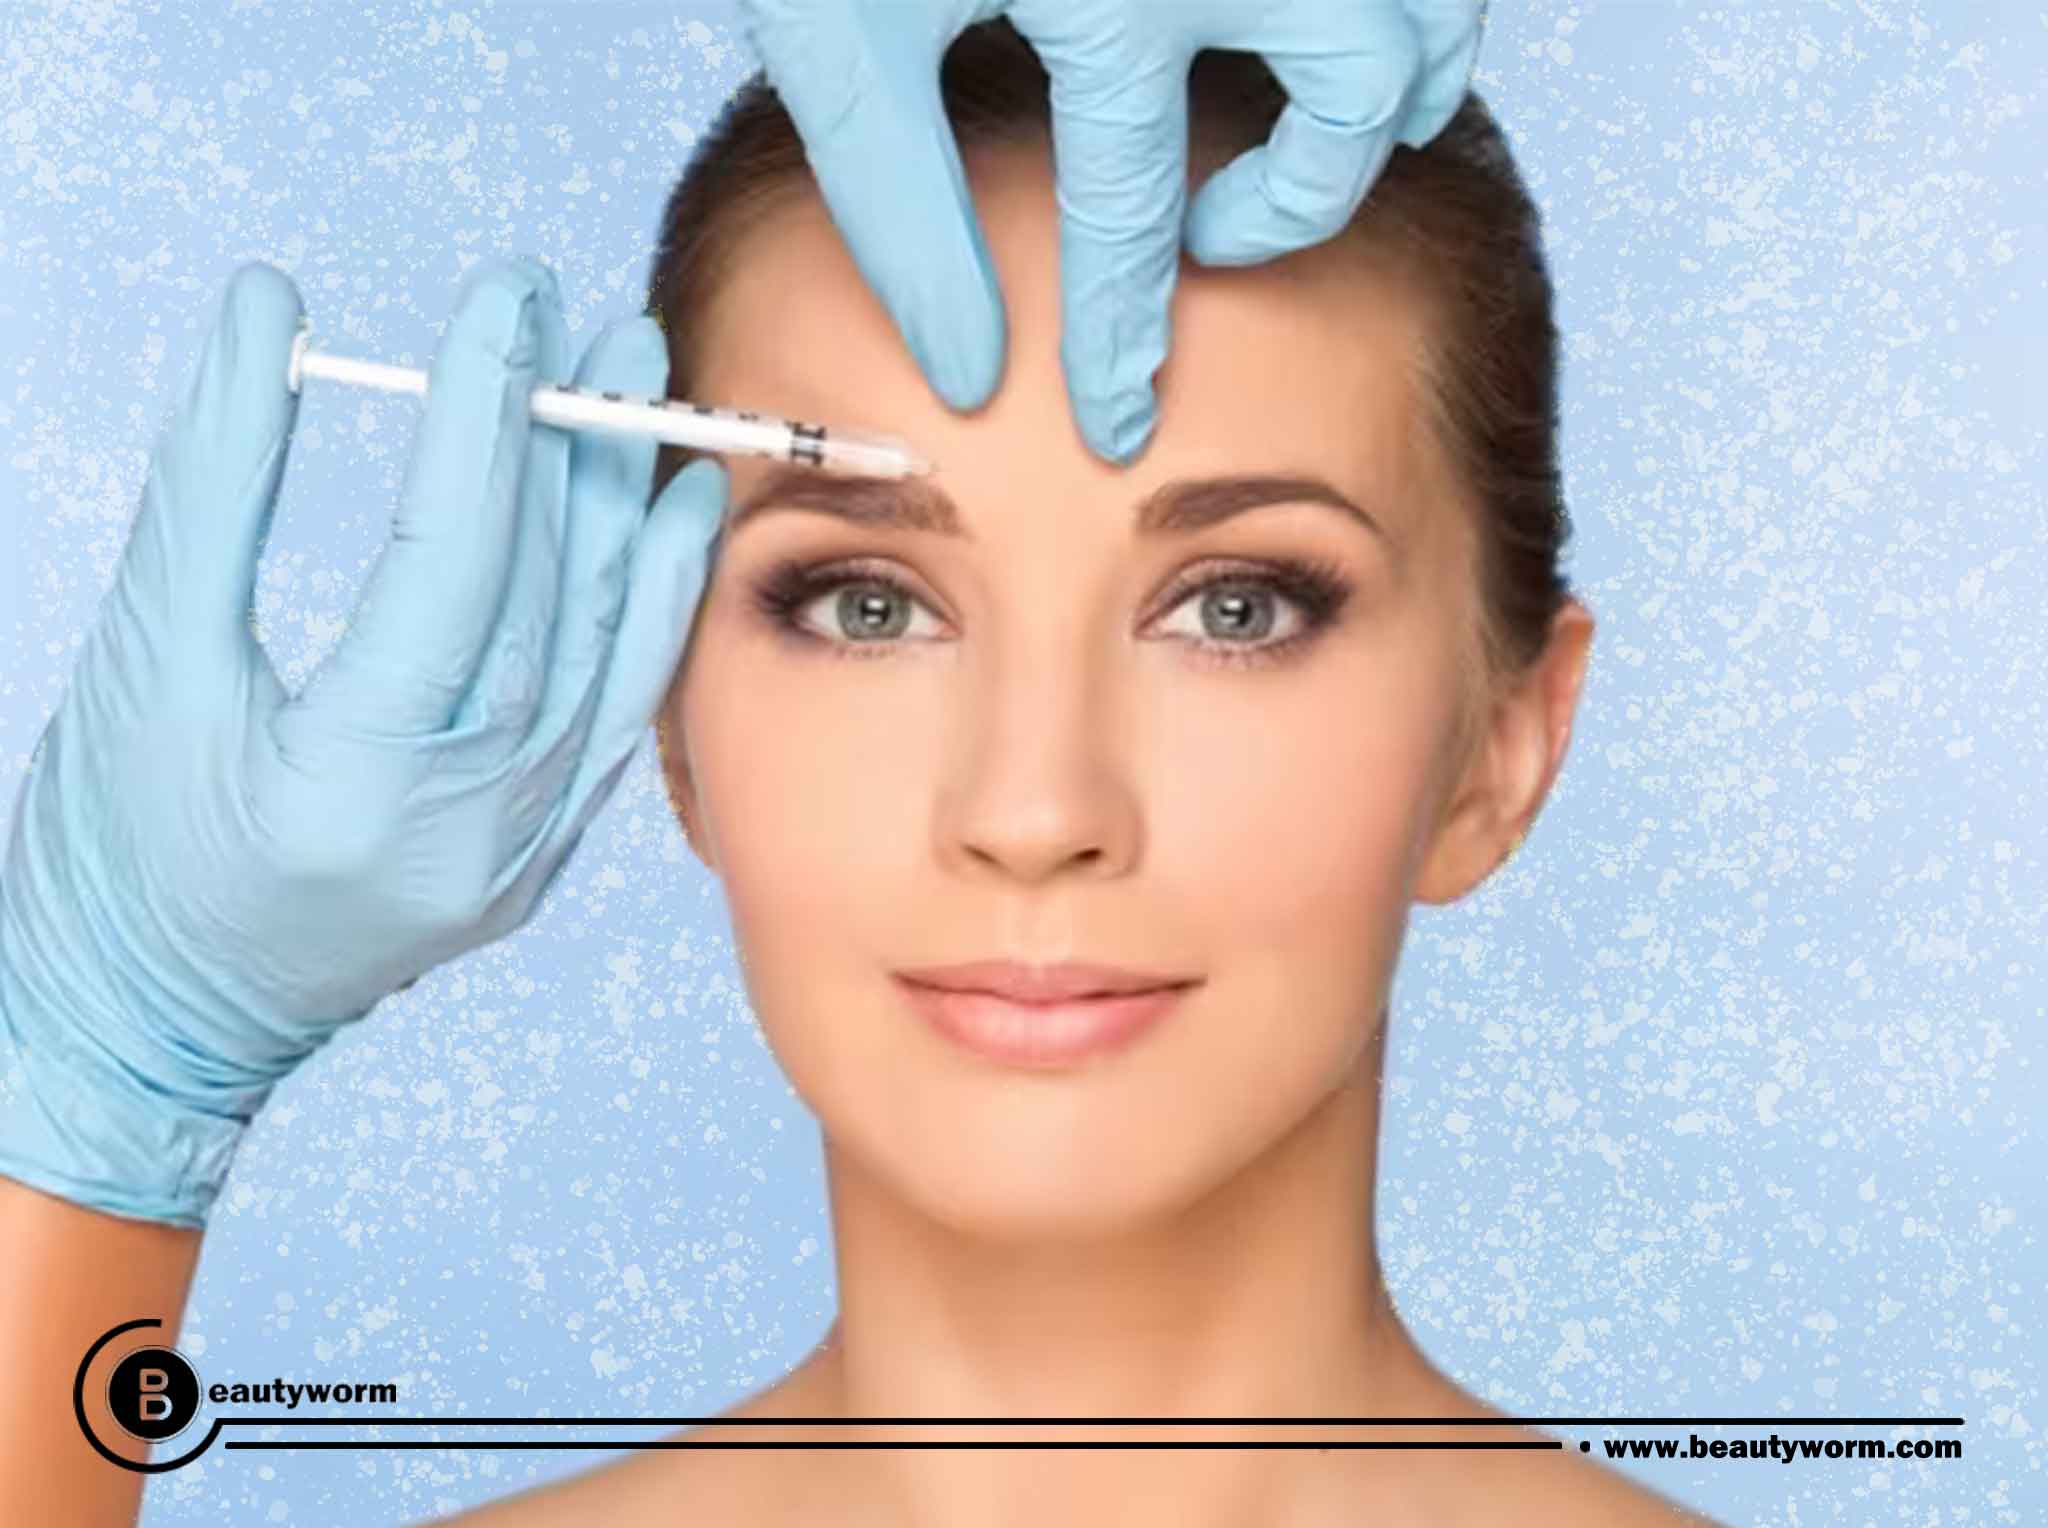 Which is the best country for cosmetic surgery?